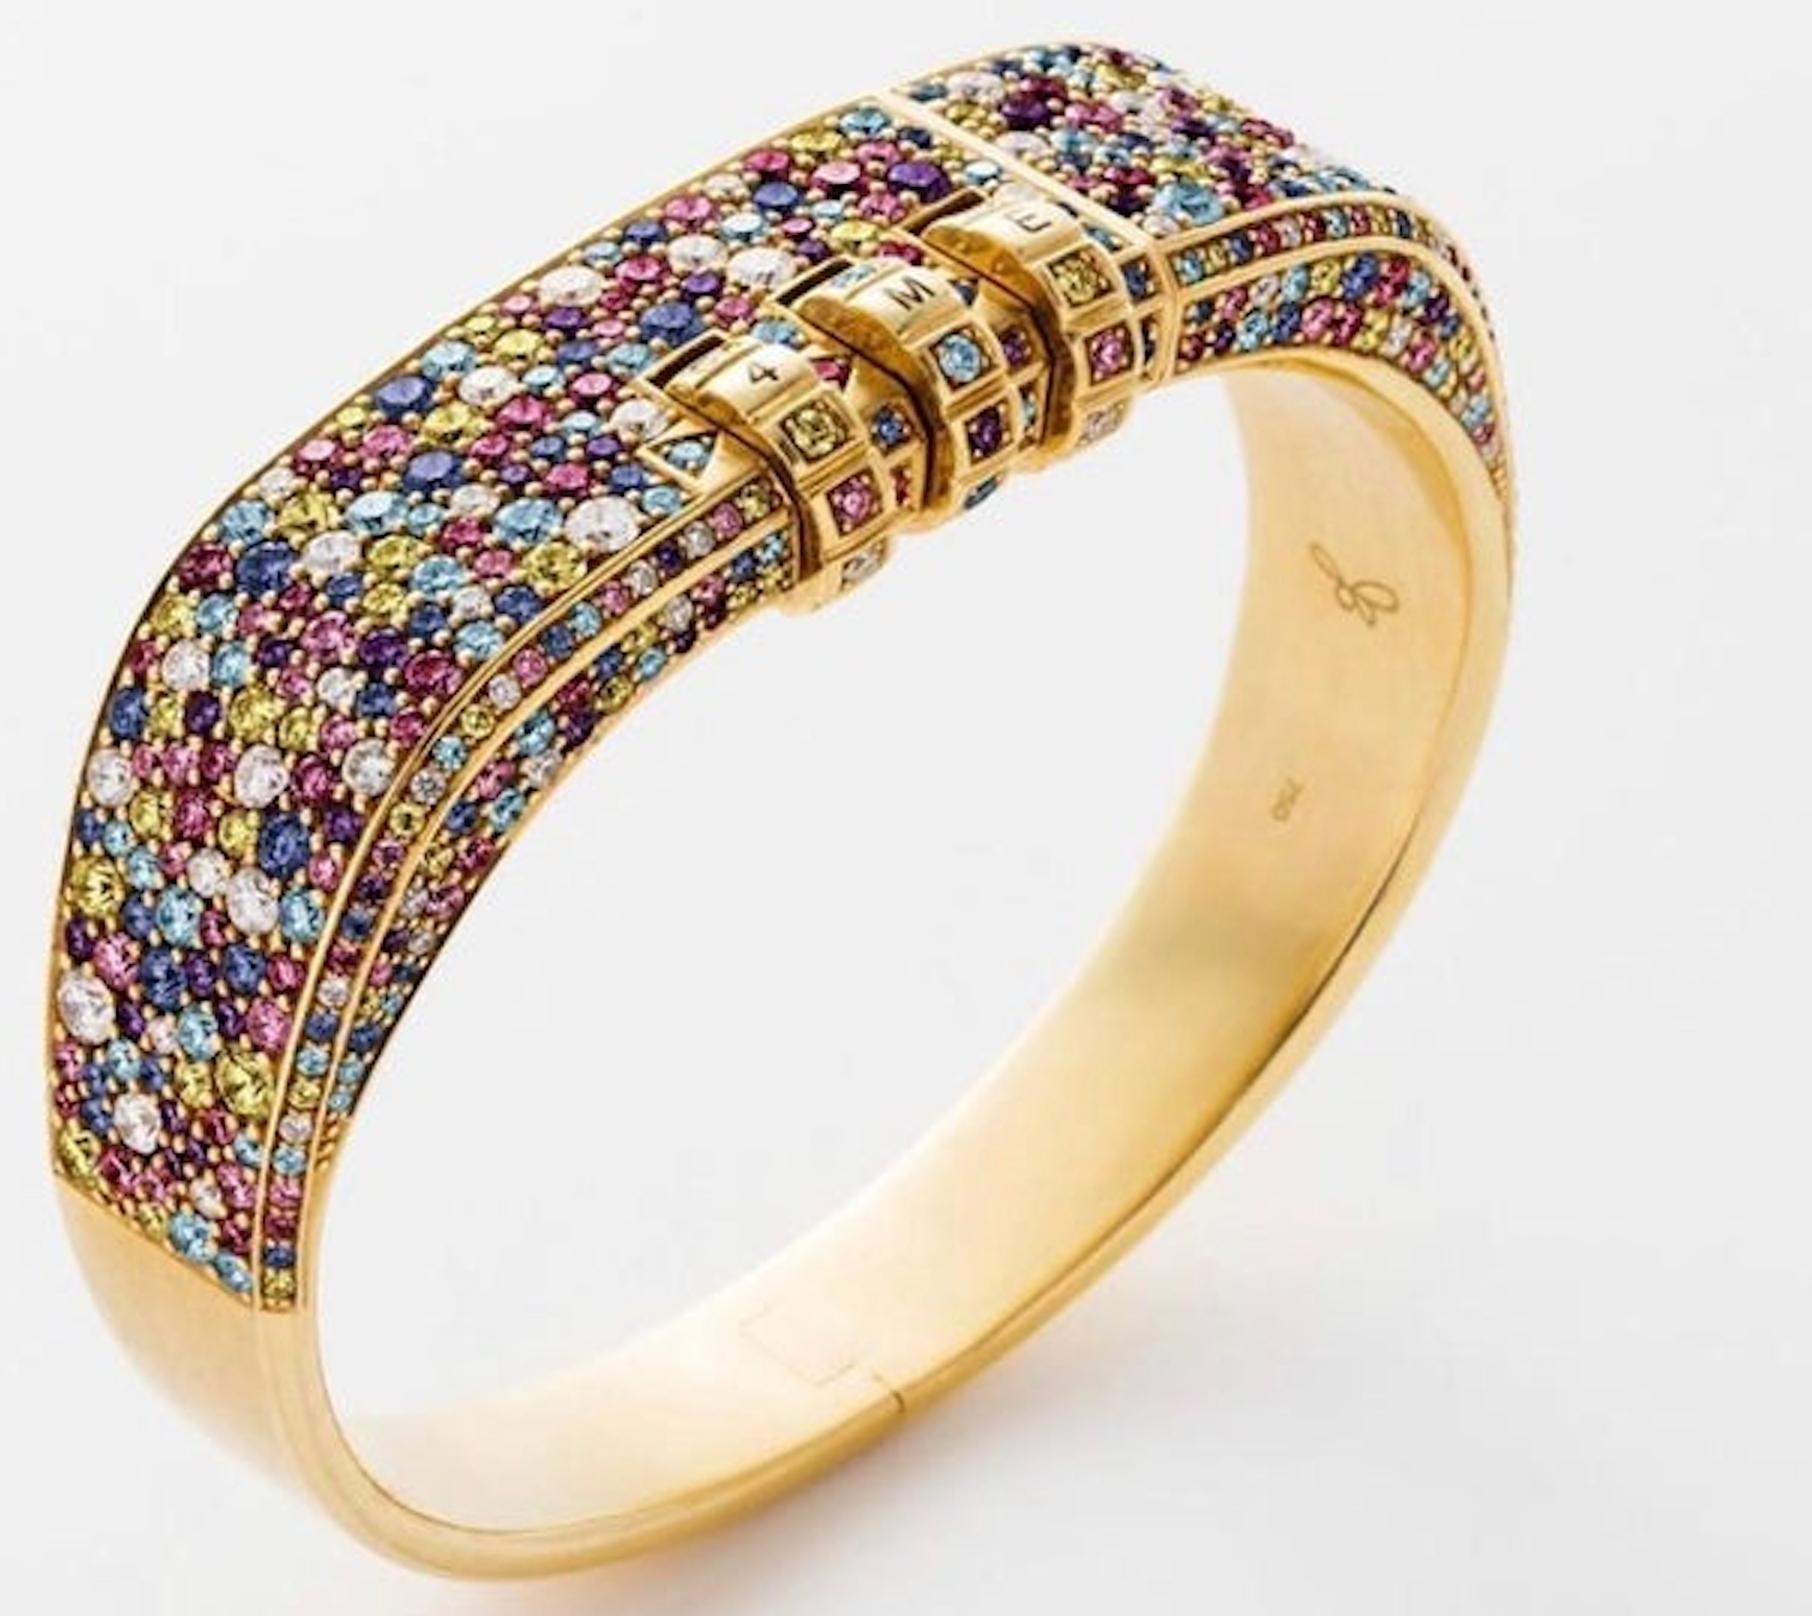 18 Karat Pave Code Bracelet features a solid 18k Yellow Gold bracelet with pave White Diamonds, Aquamarines, Pink Sapphires, Yellow Sapphires, Blue Sapphires, and Amethyst, and a custom code that opens and locks the bracelet onto the wearer's wrist.